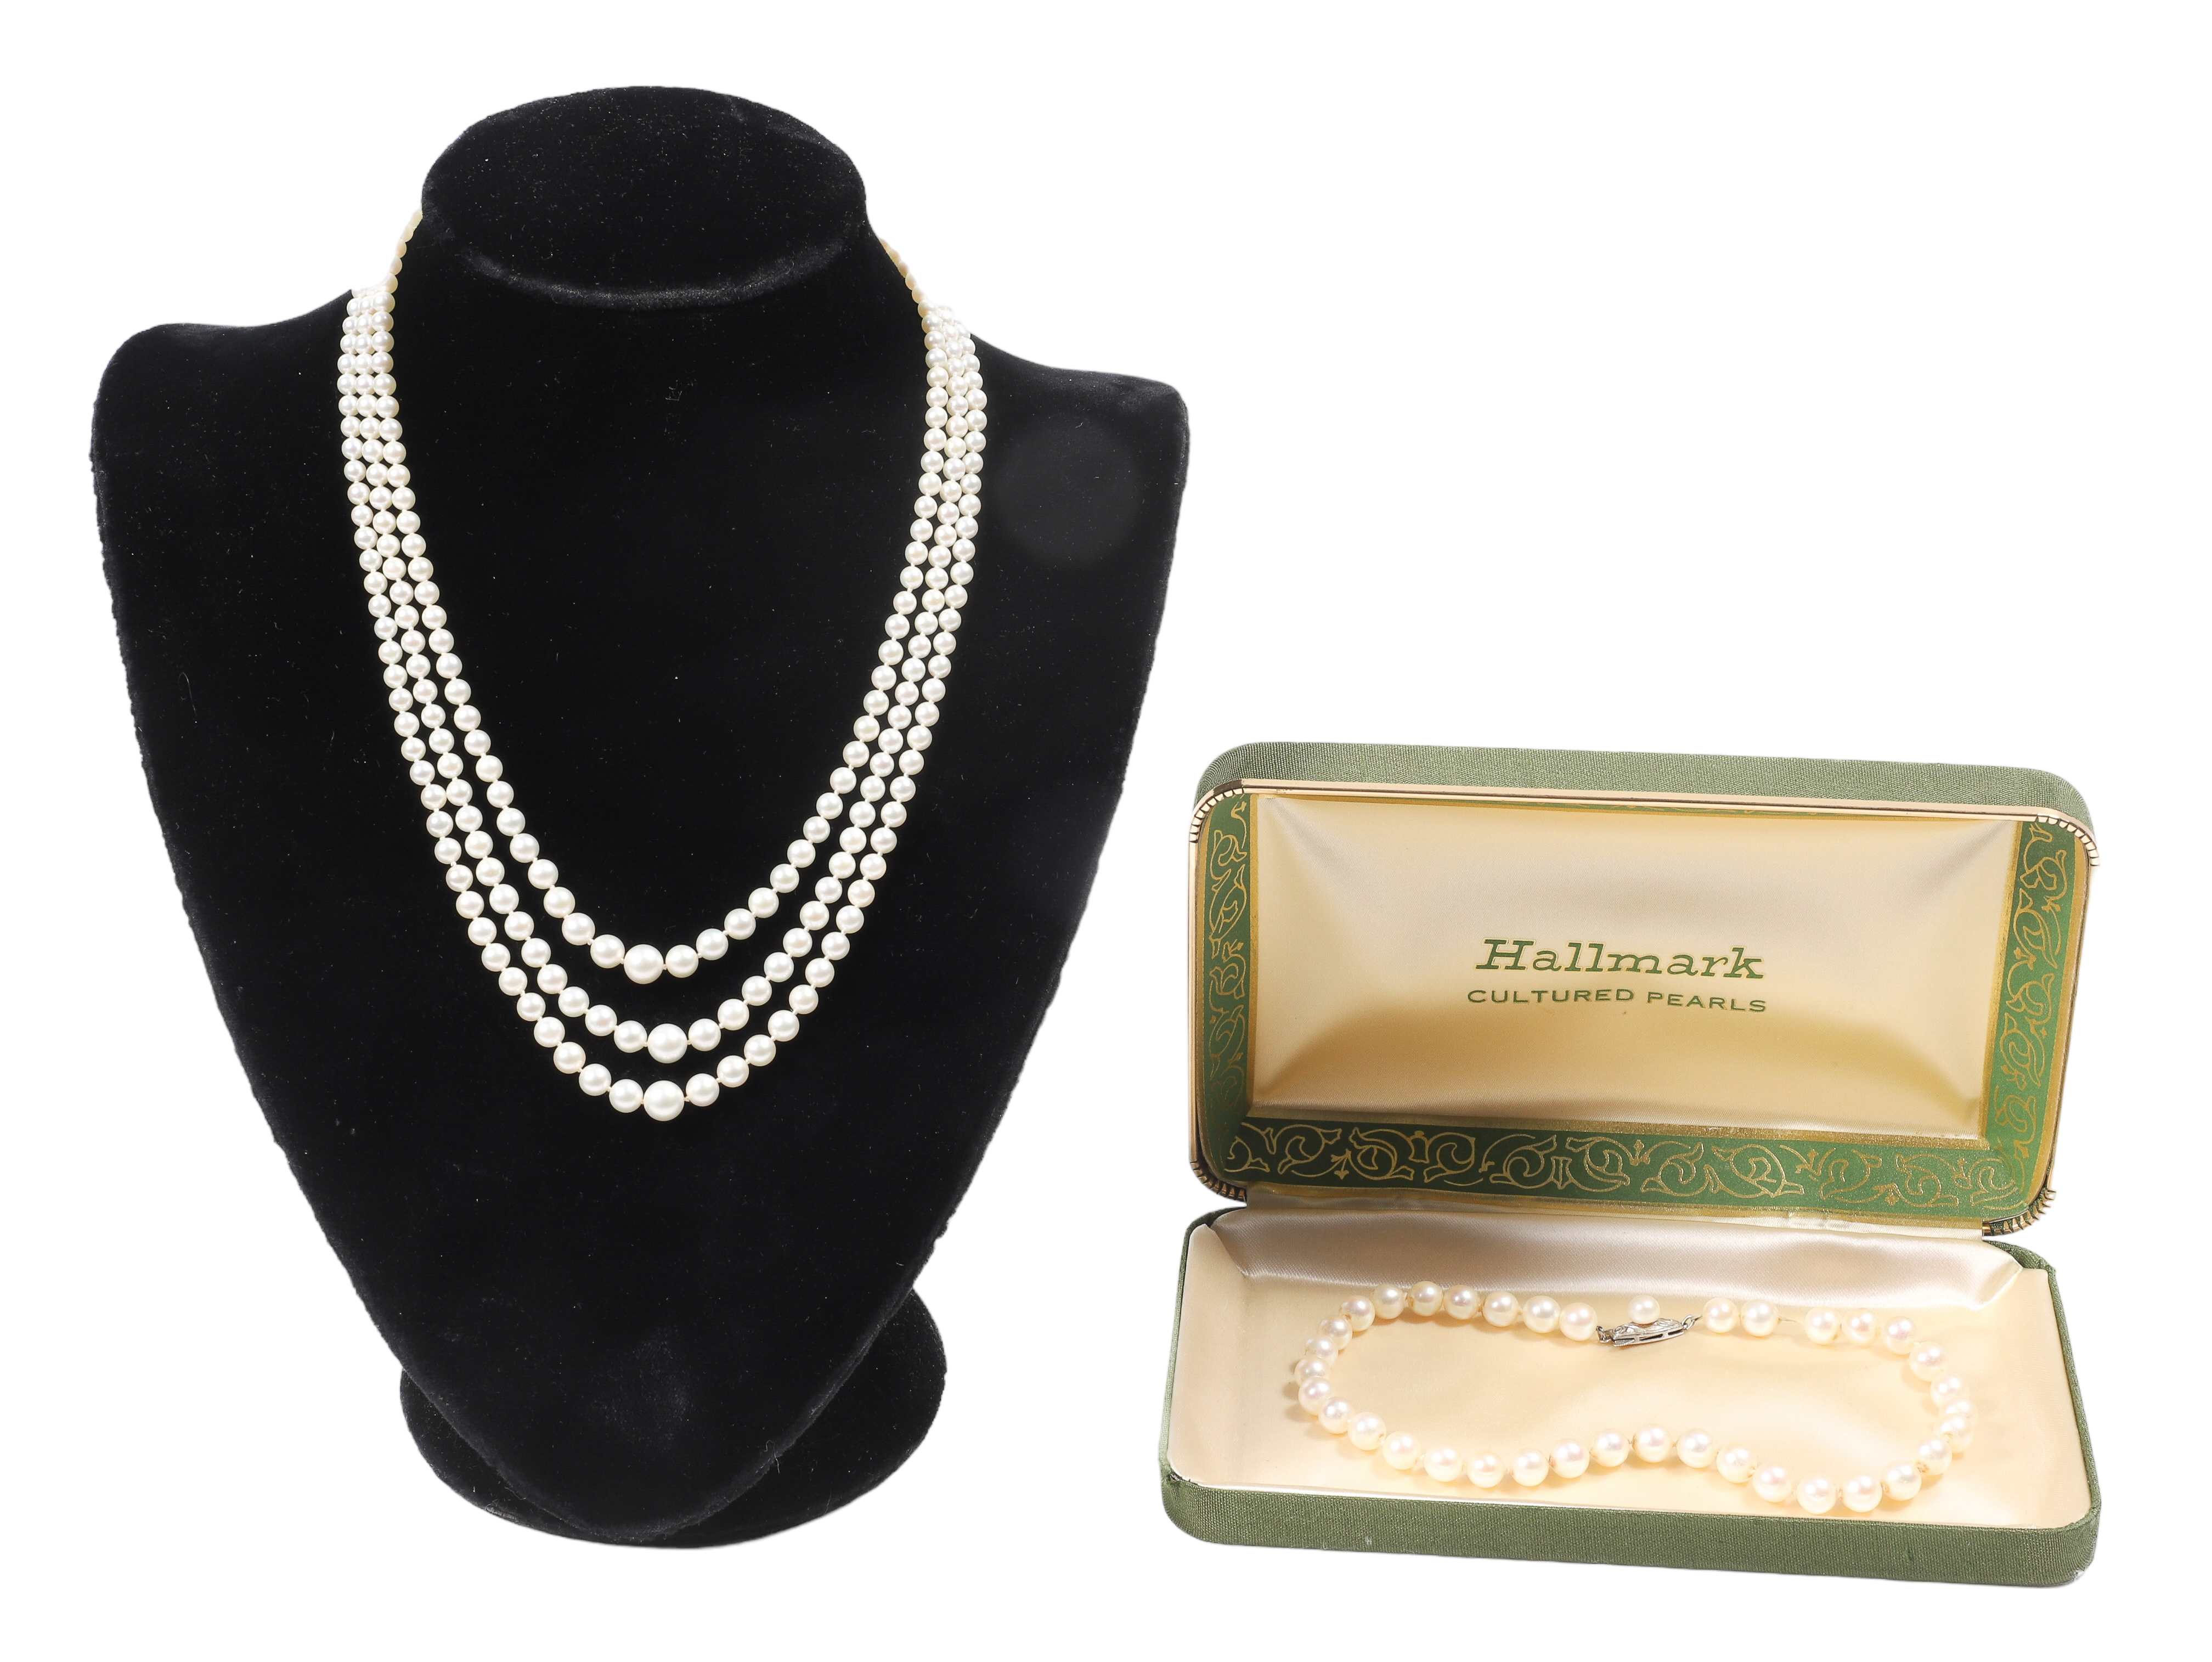 (2) 14K White gold and pearl necklaces